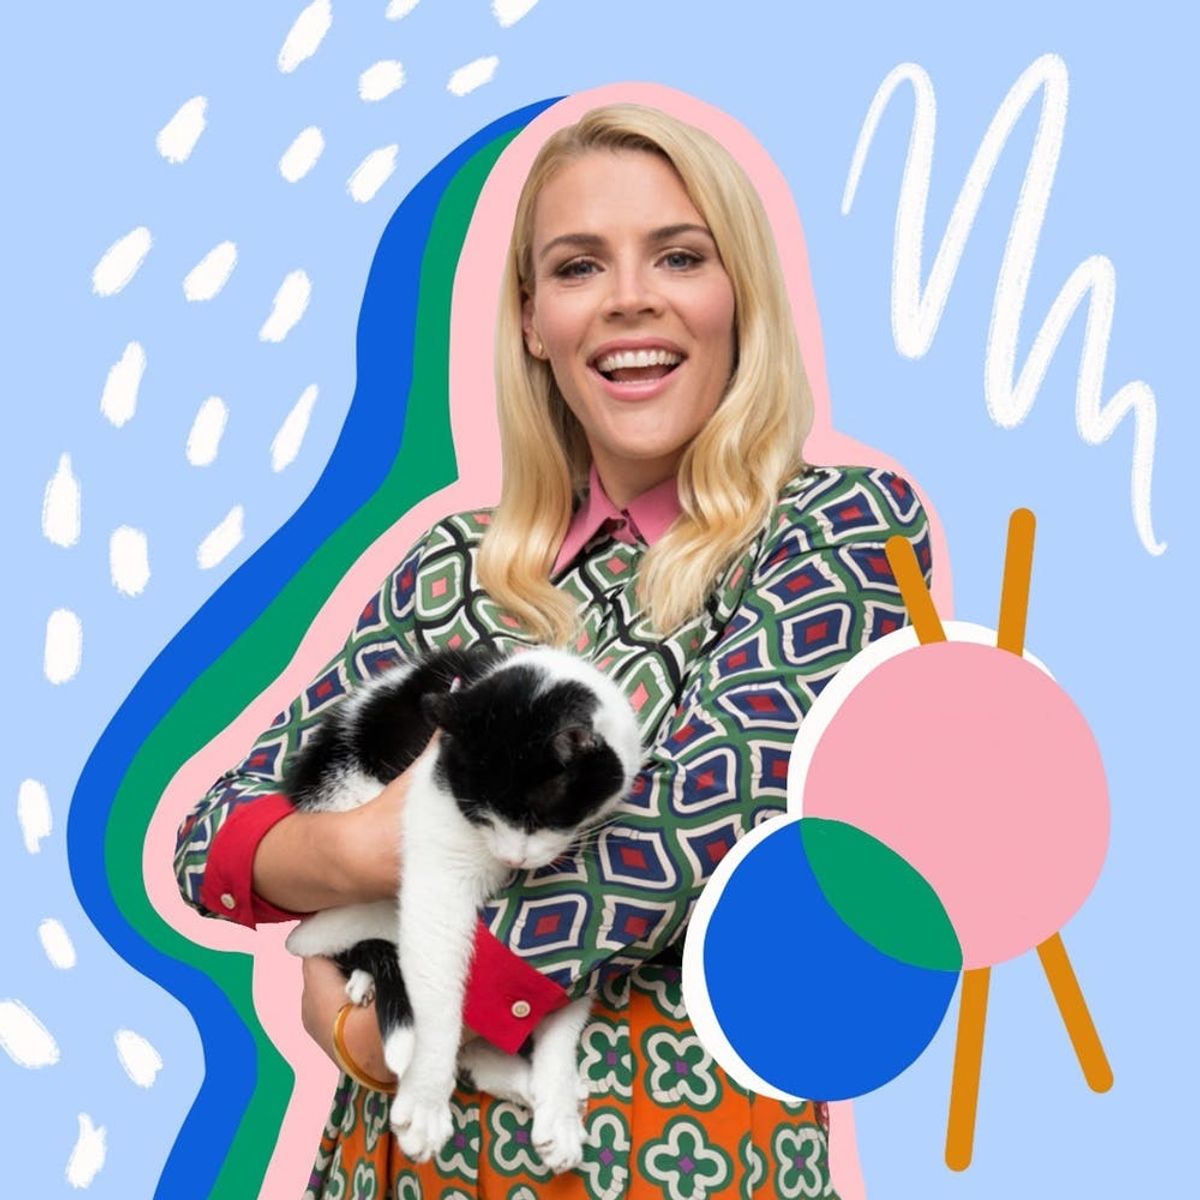 Is Busy Philipps the Most Relatable Woman In Hollywood?